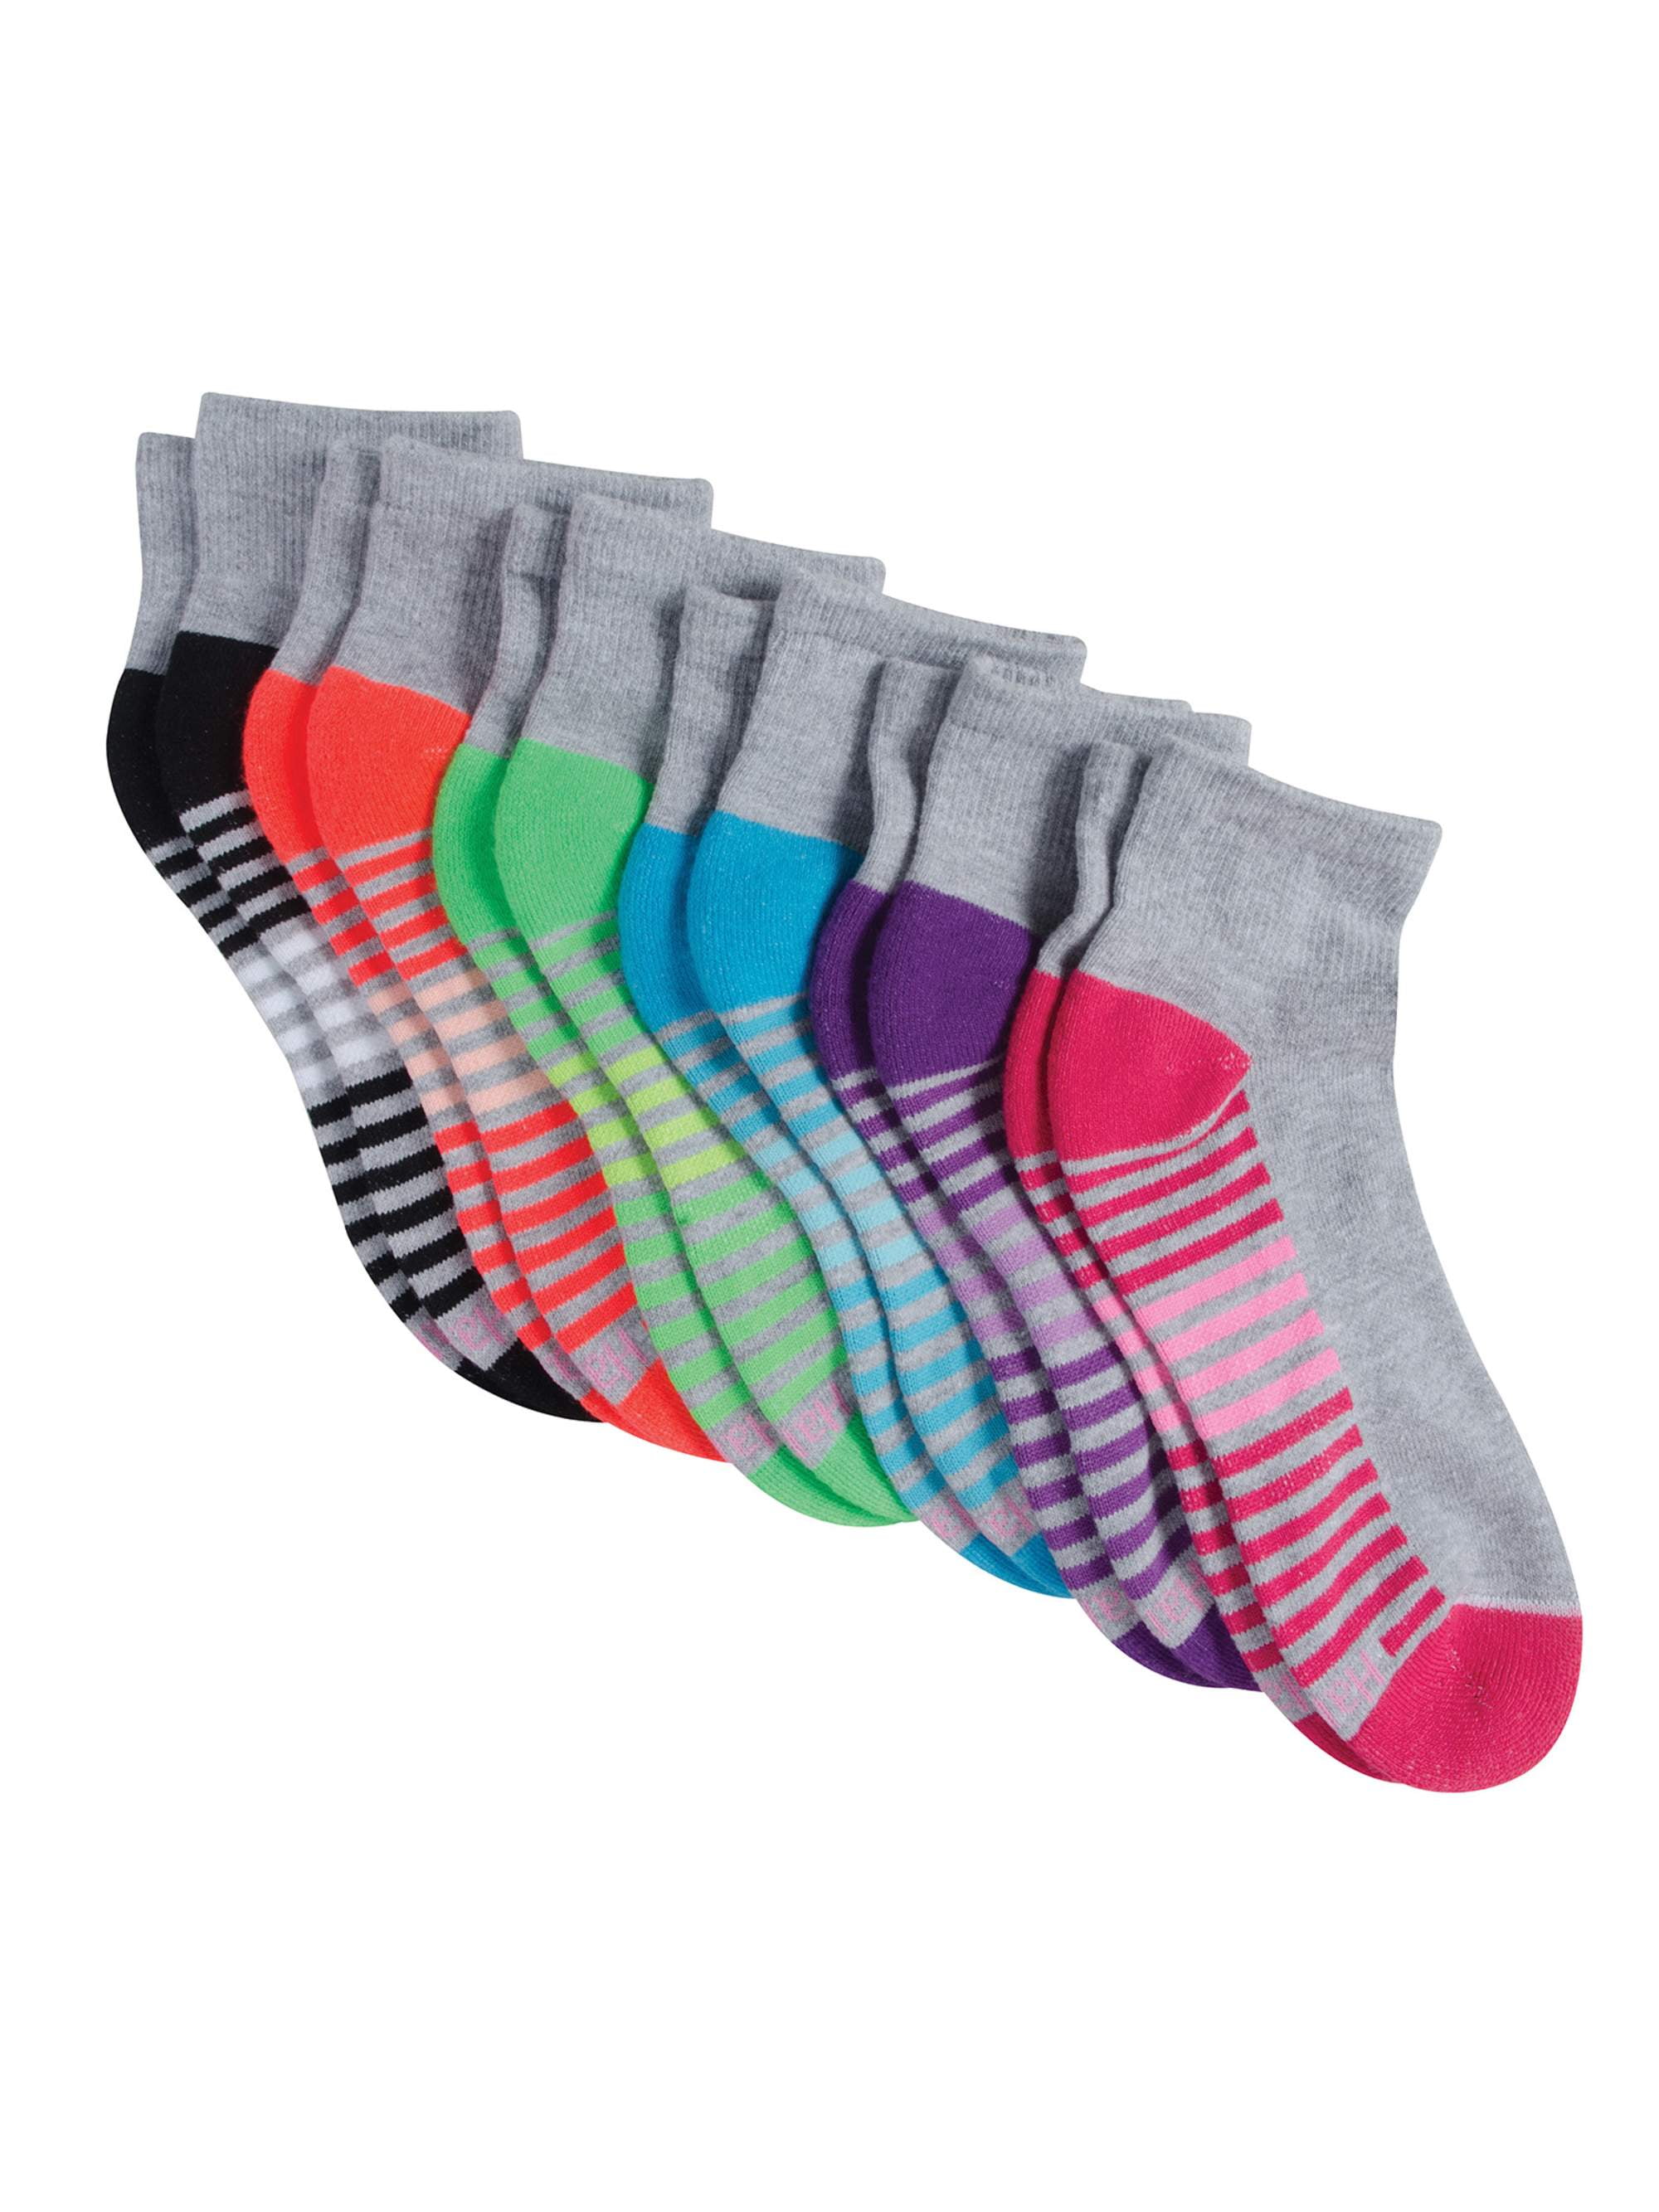 Hanes Womens 6-Pack Cool Comfort Moisture Wicking Arch Support Ankle Socks